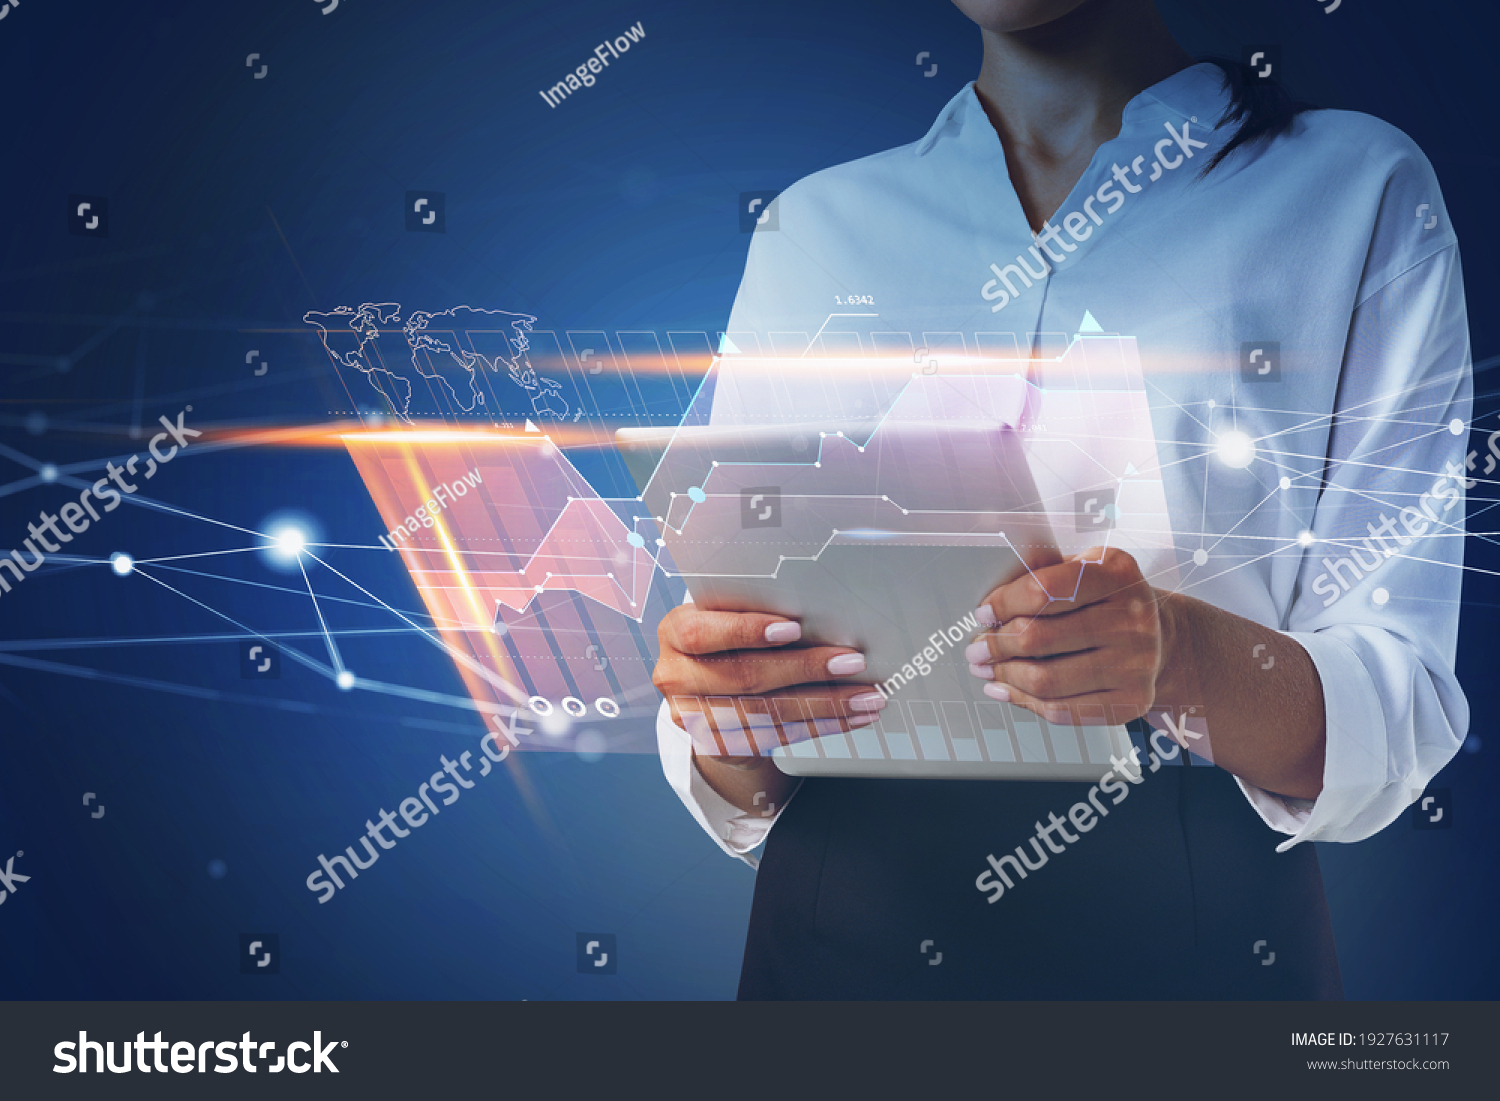 Businesswoman holding tablet and using technological approach to optimize business process. System hologram charts and graph flying nearby smartphone. Office on background. #1927631117